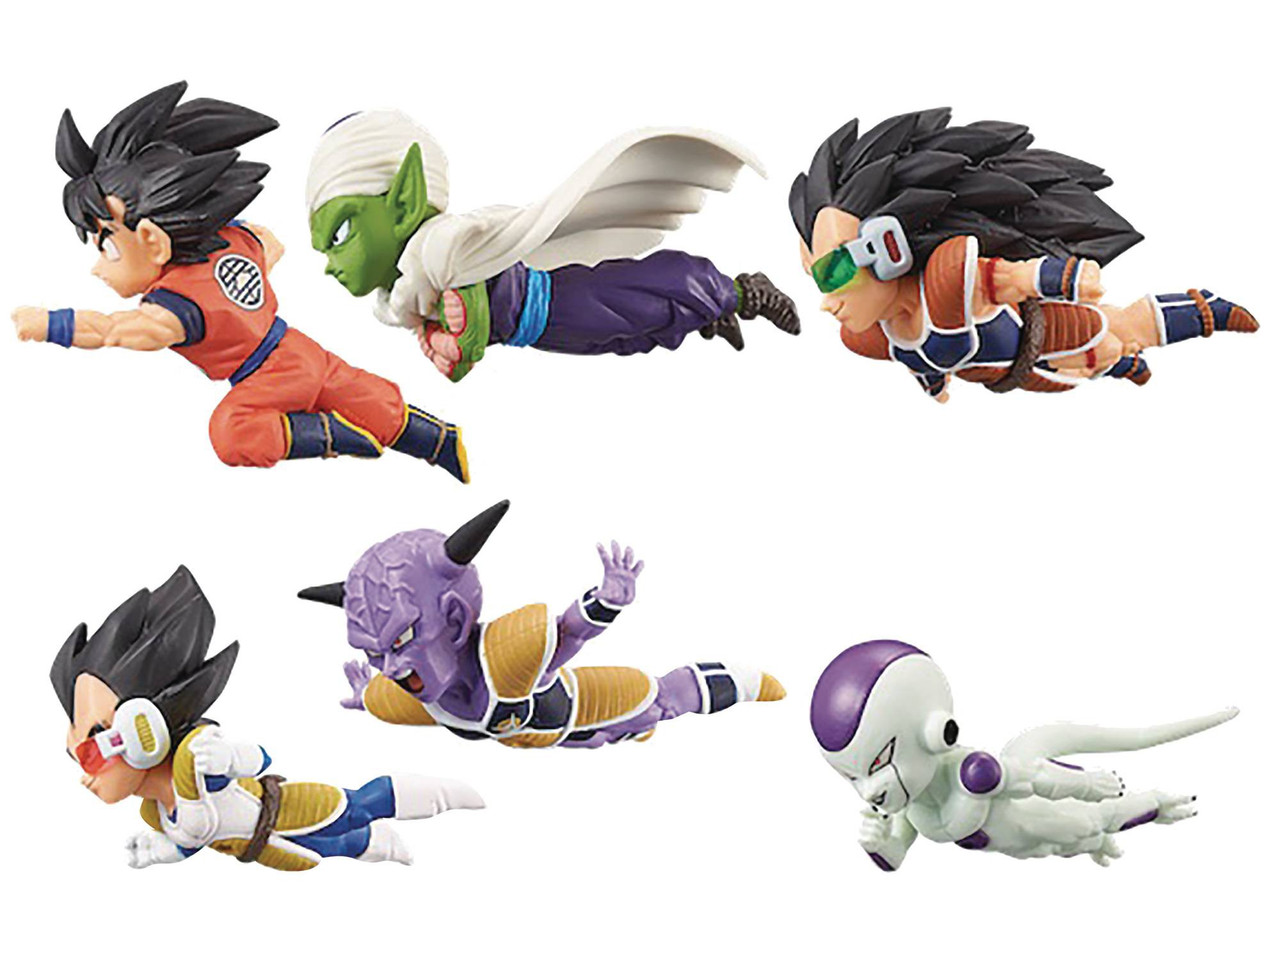 vol.2 All 6 type set Dragon Ball Super World Collectable Figure WCF Movie ver